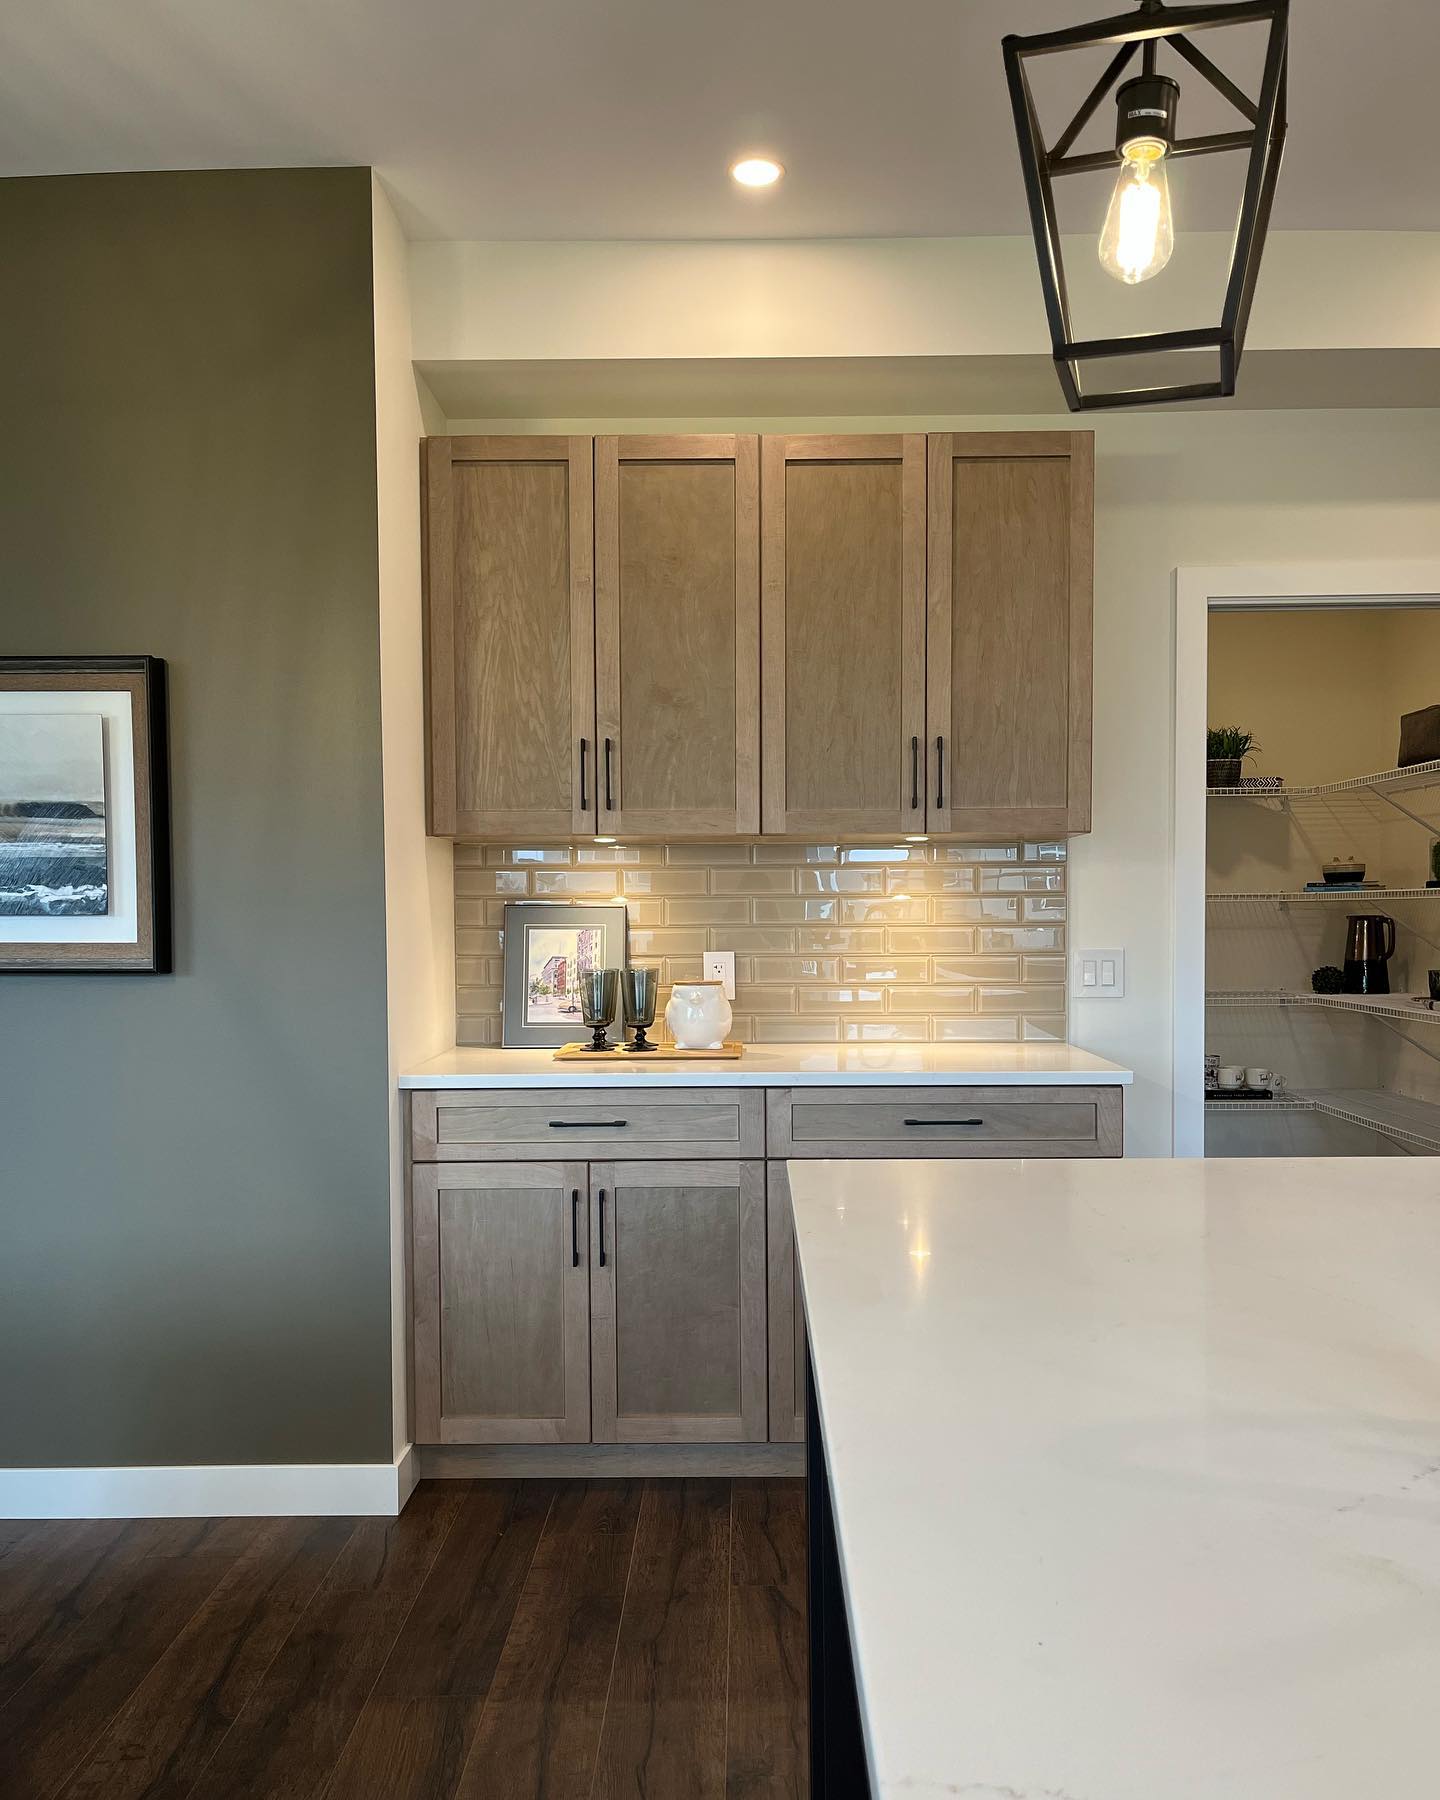 We love kitchens with a coffee bar feature! 

The cool toned ceramic tile backsplash compliments the cabinetry just right. You’ll be able to tour through our brand new show home very soon! Stay tuned and visit our website for more information.